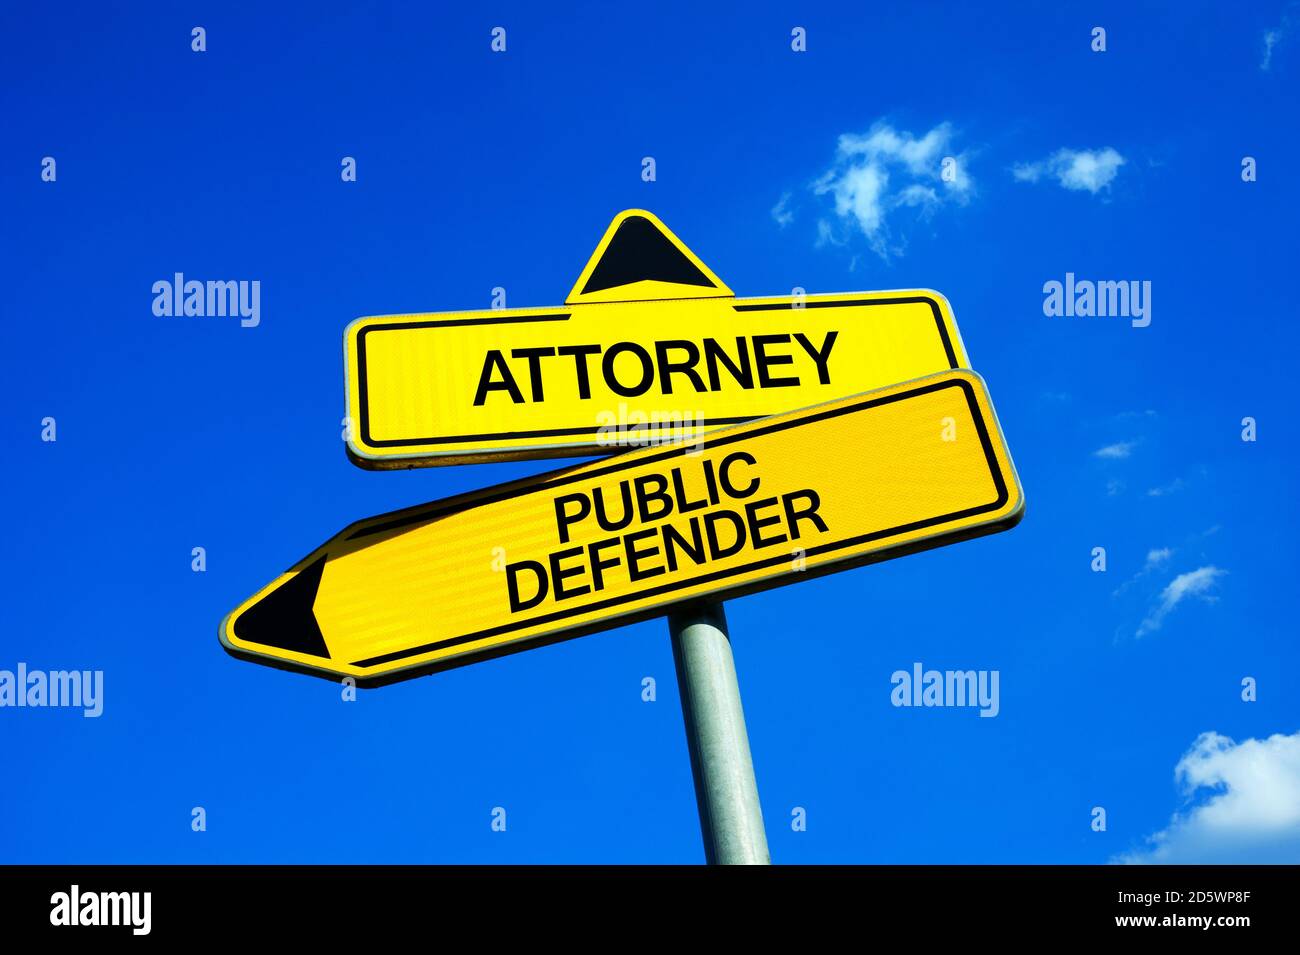 Attorney vs Public Defender - Traffic sign with two options - choosing private advocate or lawyer assigned by state. Quality of advocacy, defence and Stock Photo